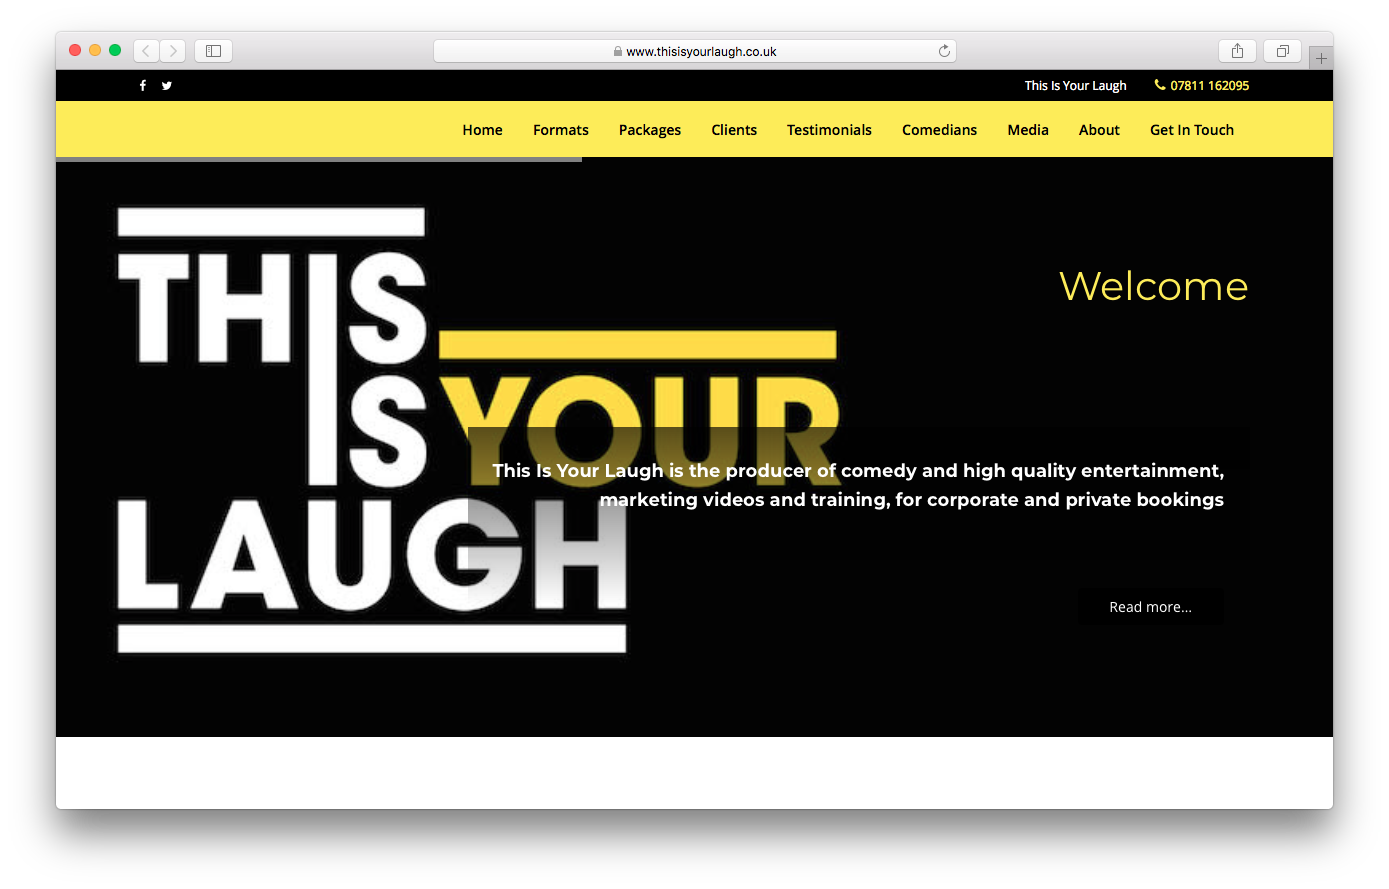 This Is Your Laugh - www.thisisyourlaugh.co.uk